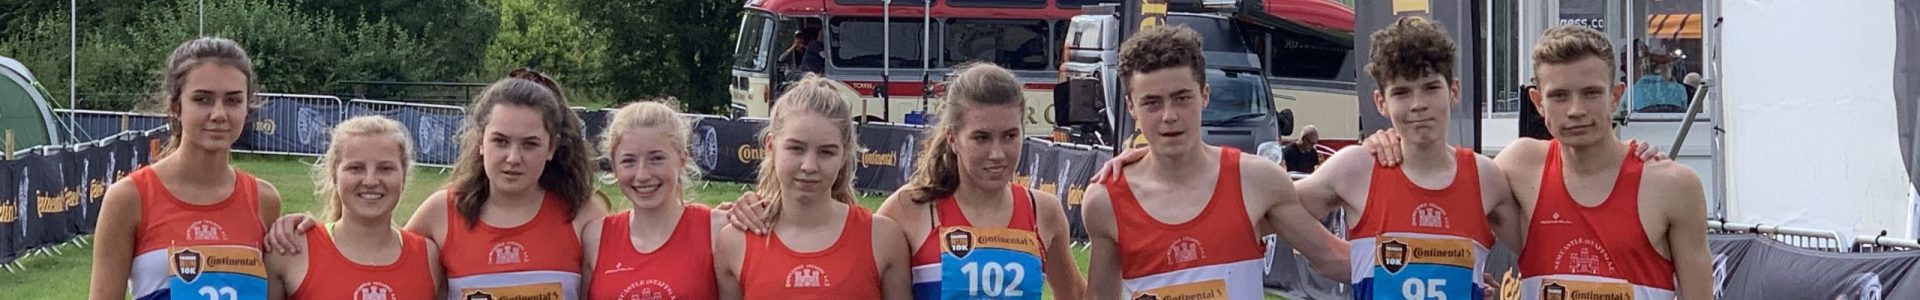 Staffordshire Track and Field Championships – 12/5/2018